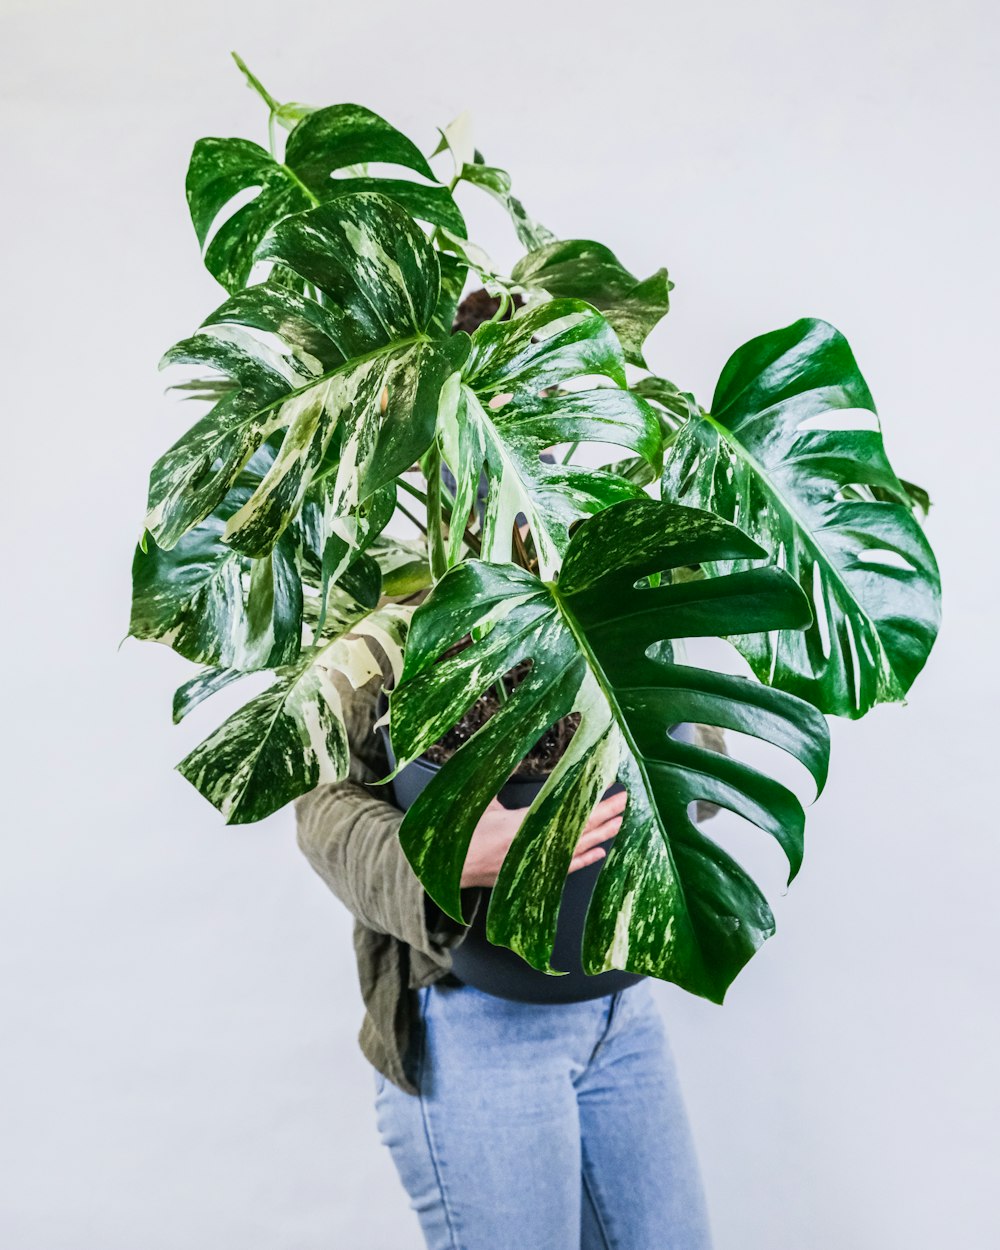 person in gray jacket and blue denim jeans standing beside green plant